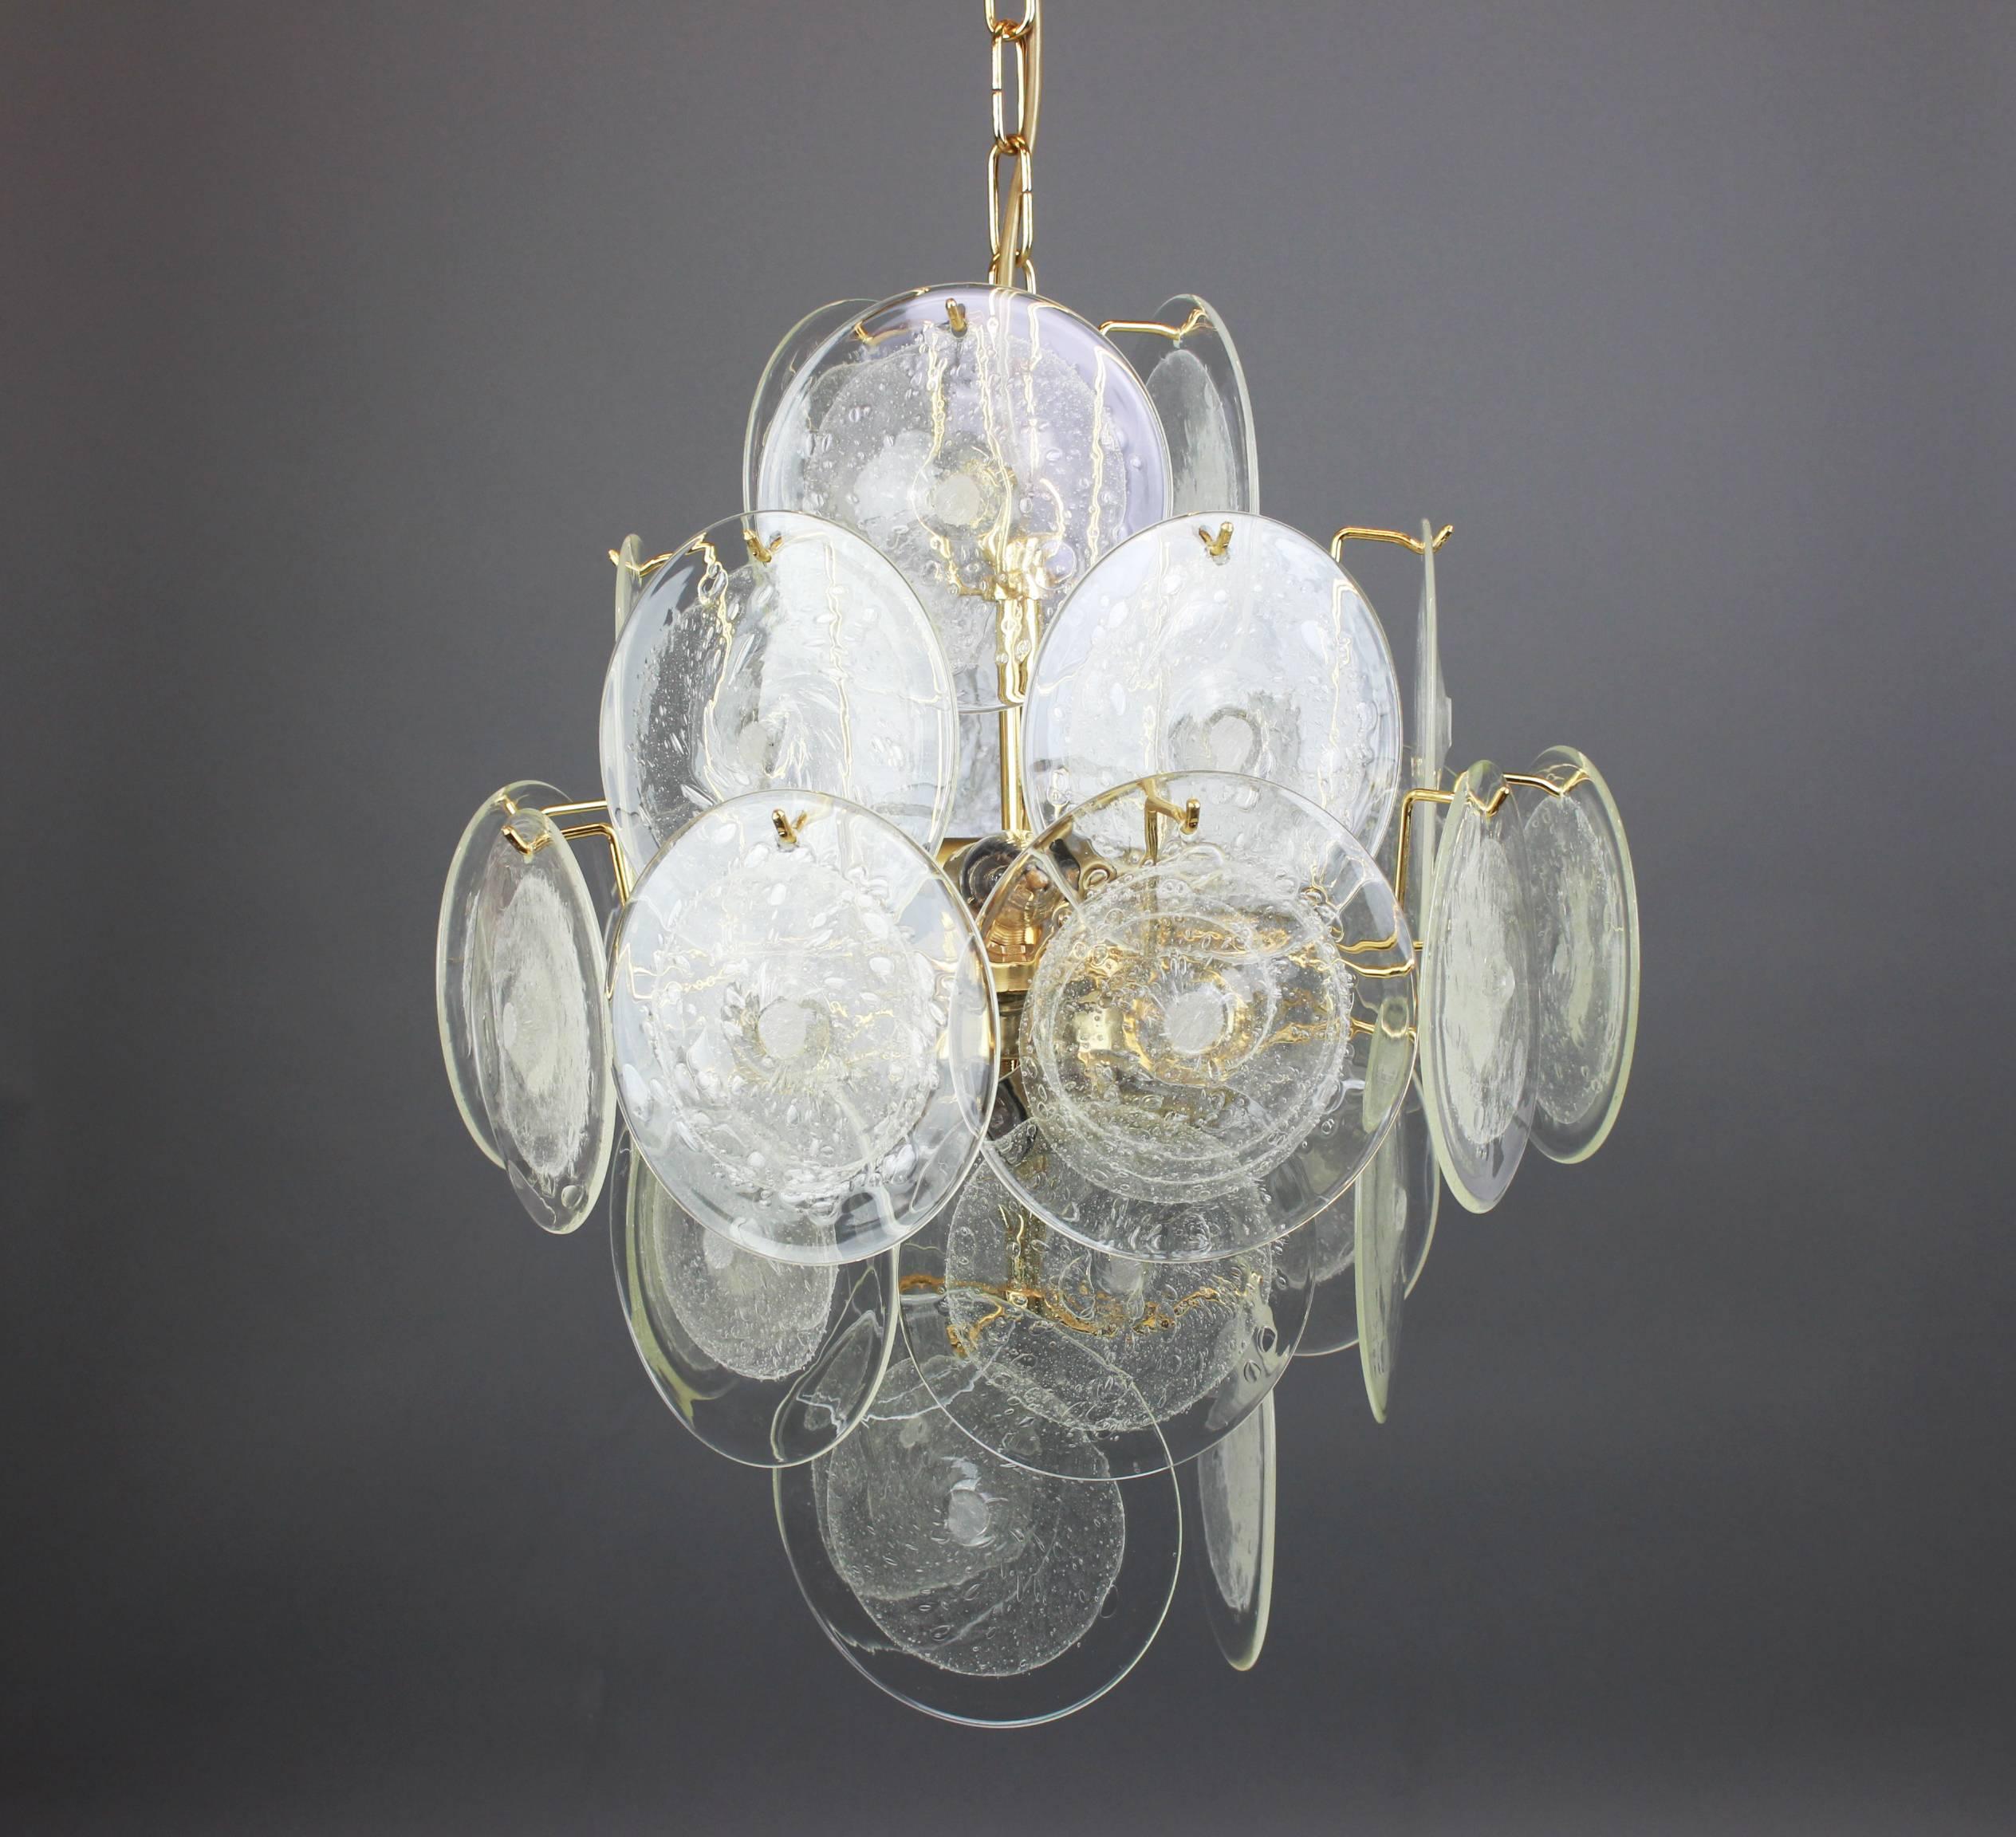 Wonderful ice glass disc chandelier by Vistosi, Italy, 1970s.

This spectacular mouth blown glass disc chandelier is characteristic of the design vocabulary of Gino Vistosi: simple, geometric shapes and monochrome colours executed in the cased glass